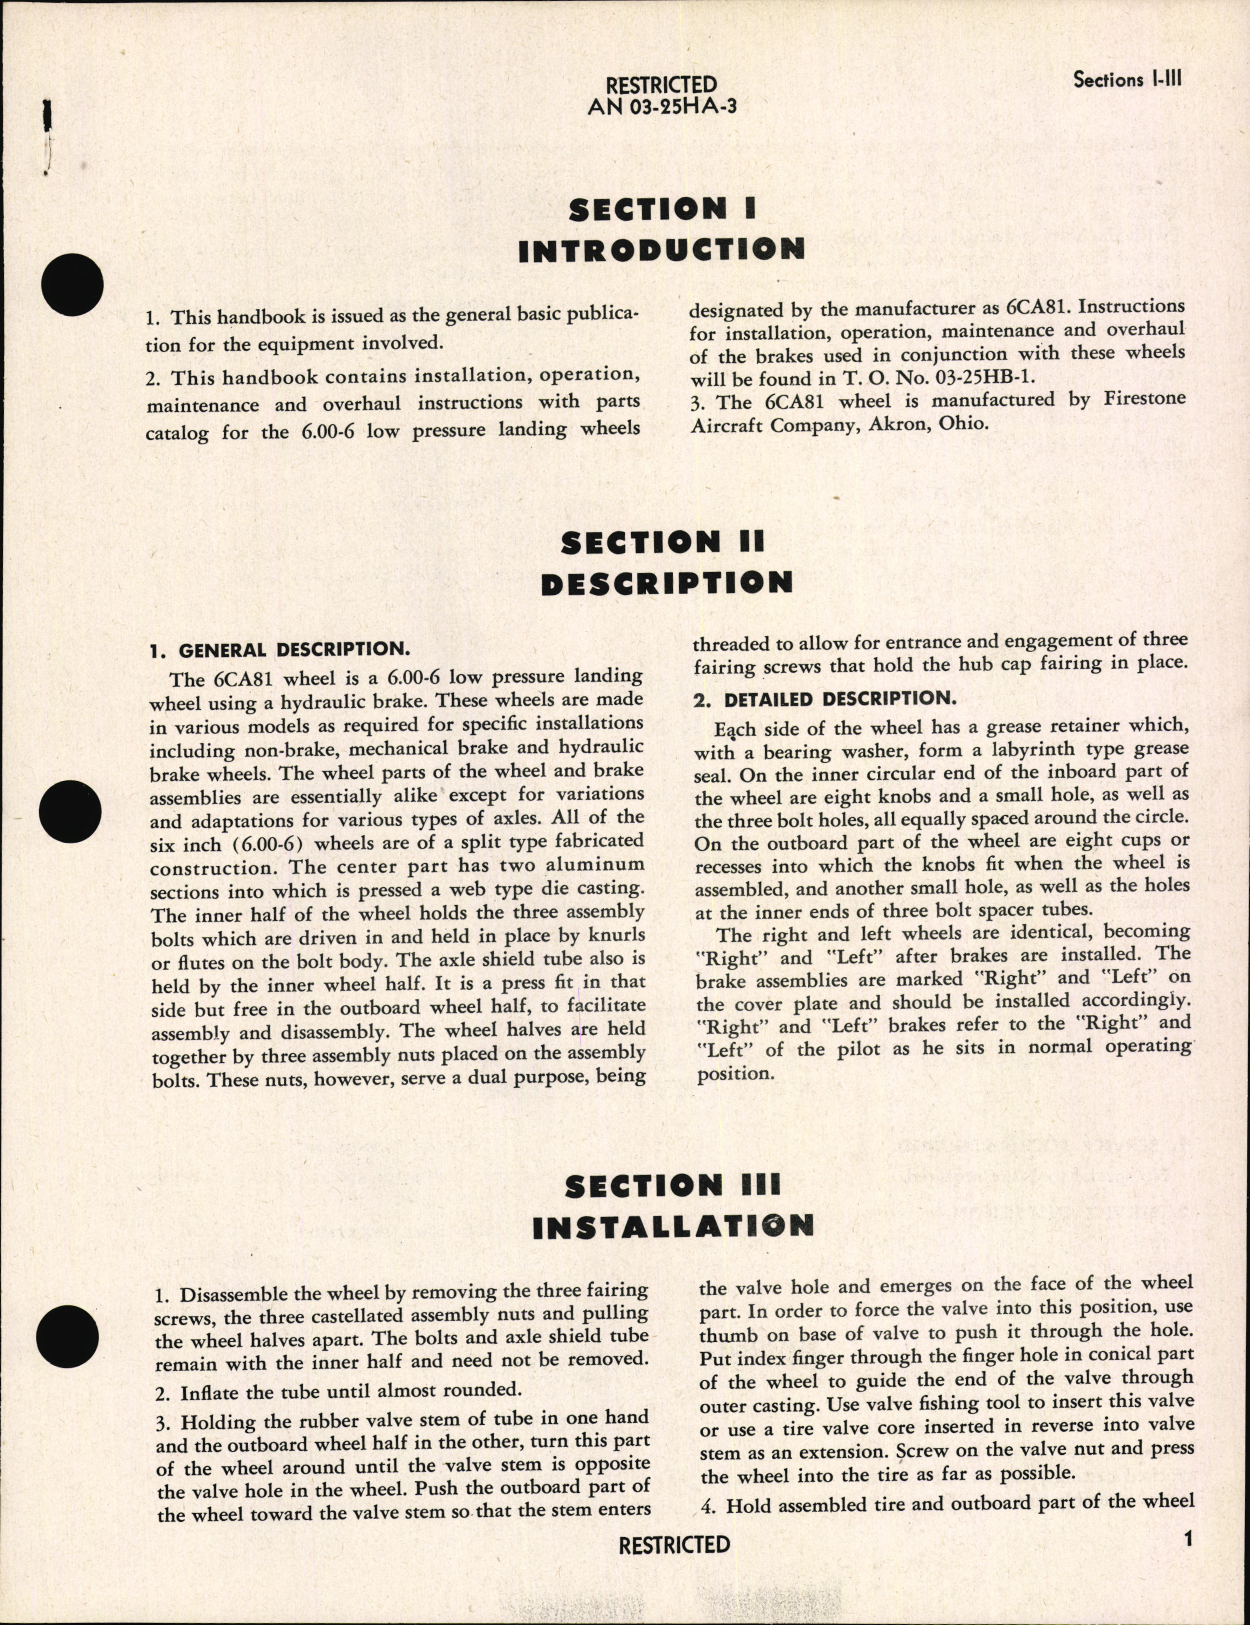 Sample page 5 from AirCorps Library document: Handbook of Instructions with Parts Catalog for Low Pressure Landing Wheels